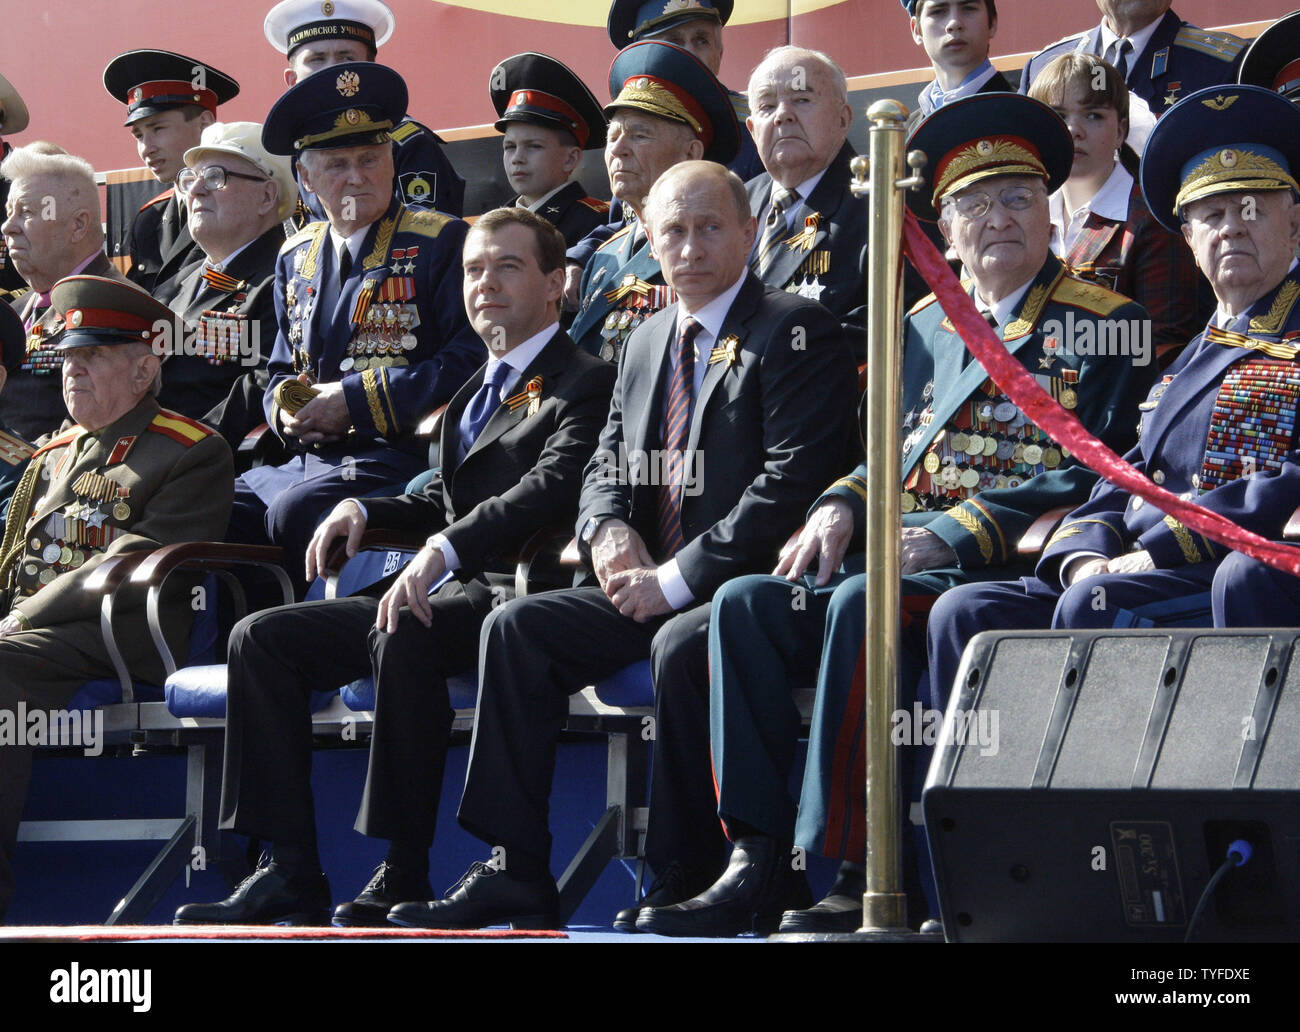 Russian President Dmitry Medvedev (3rd L) and Prime Minister Vladimir Putin (C) attend the Victory Day military parade in Red Square in Moscow on May 9, 2009. Today Russia celebrates the 64th anniversary of the World War Two victory over Nazi Germany. (UPI Photo/Anatoli Zhdanov) Stock Photo